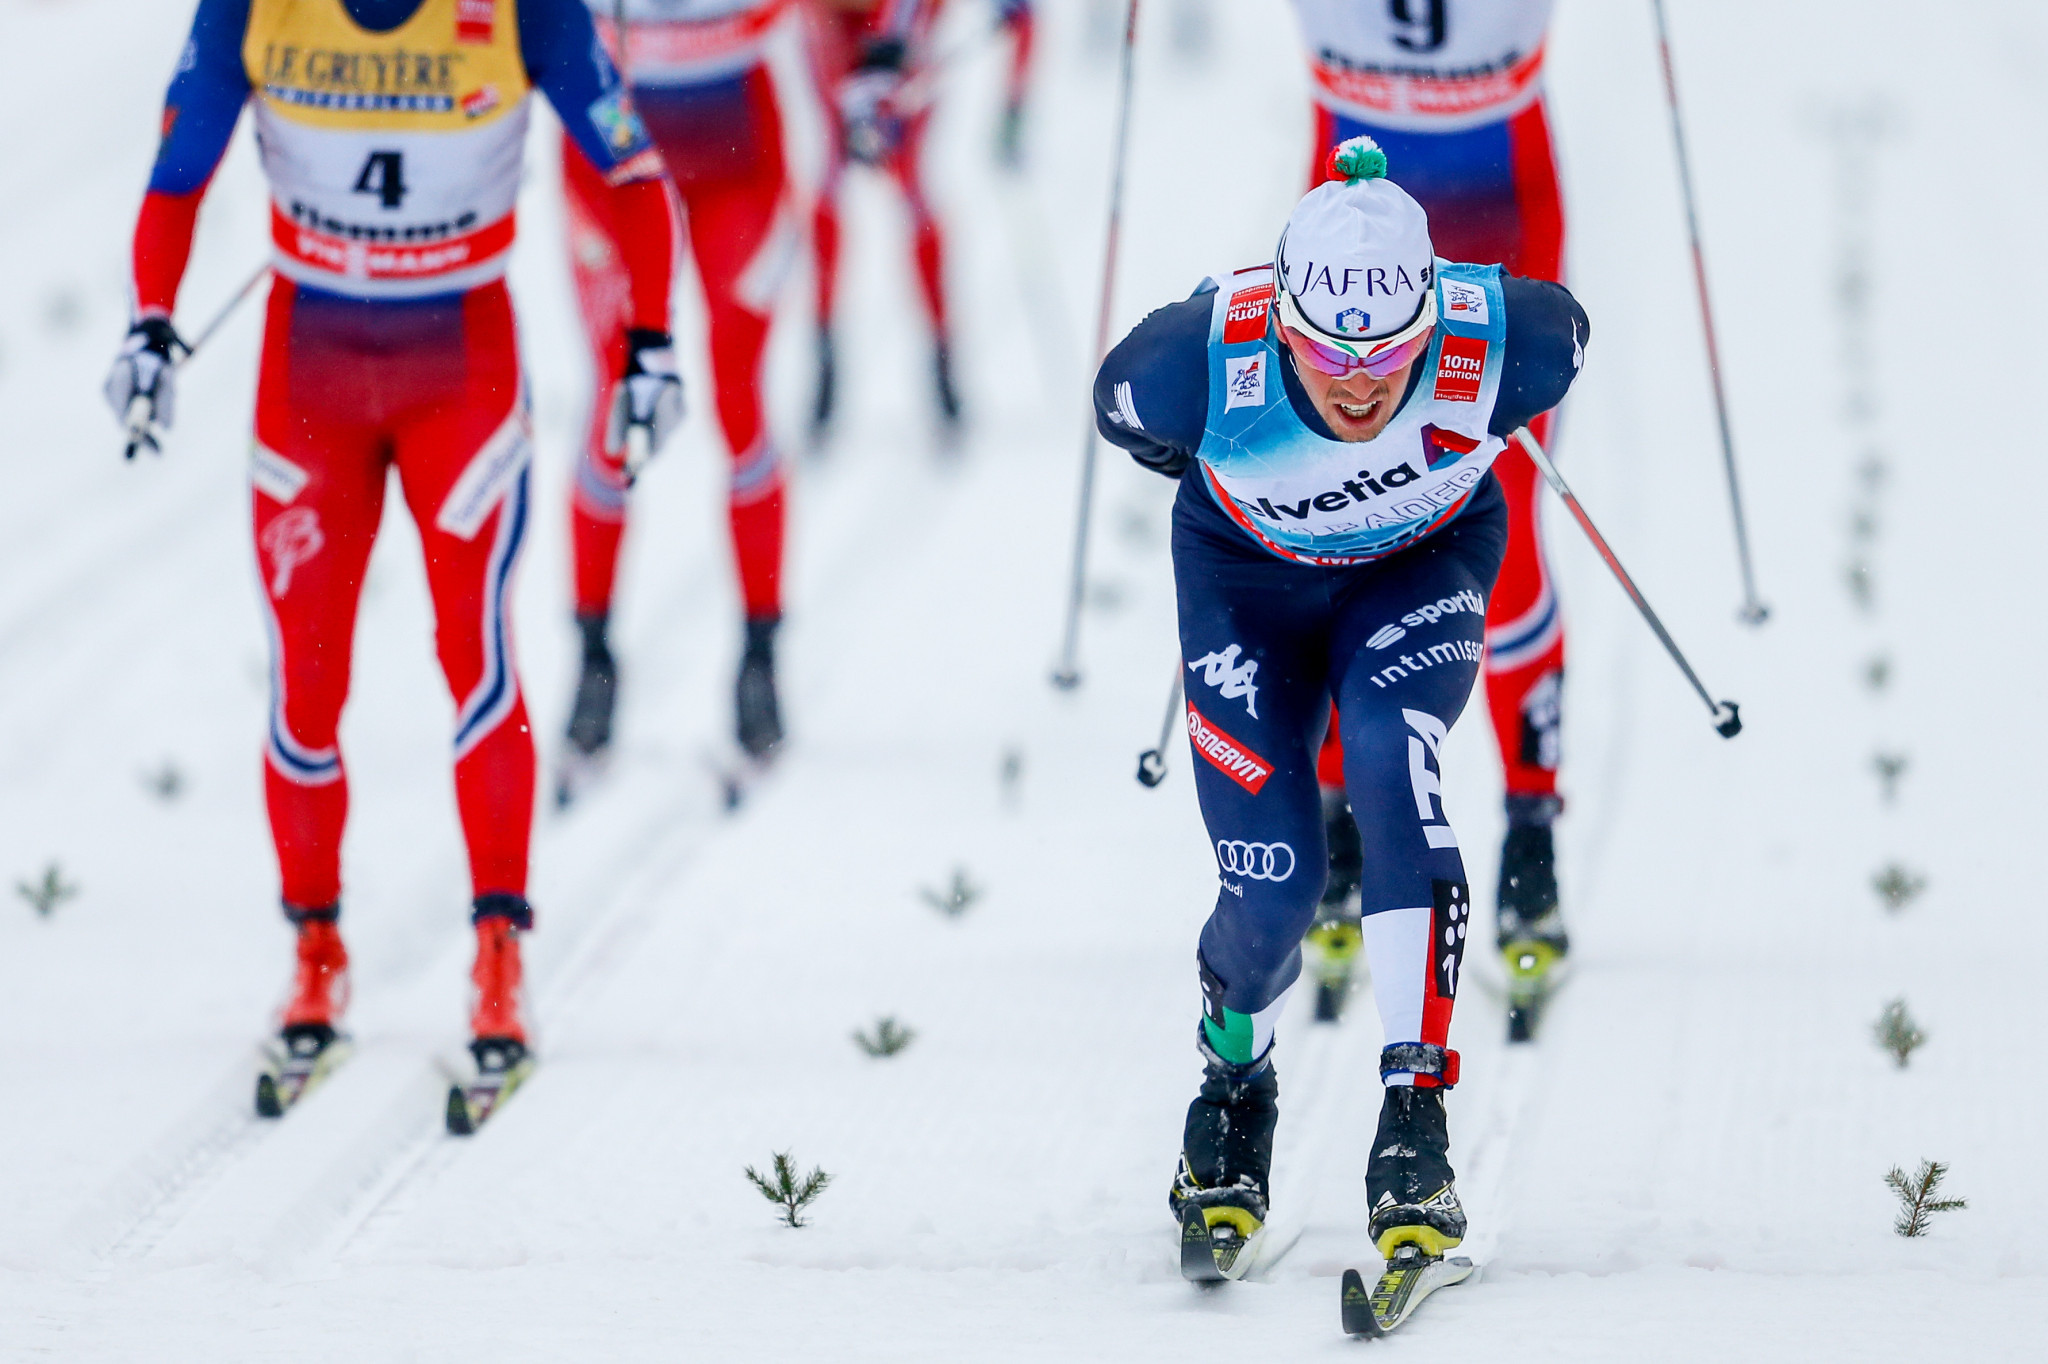 Italian cross-country skiing will be under new leadership ©Getty Images 